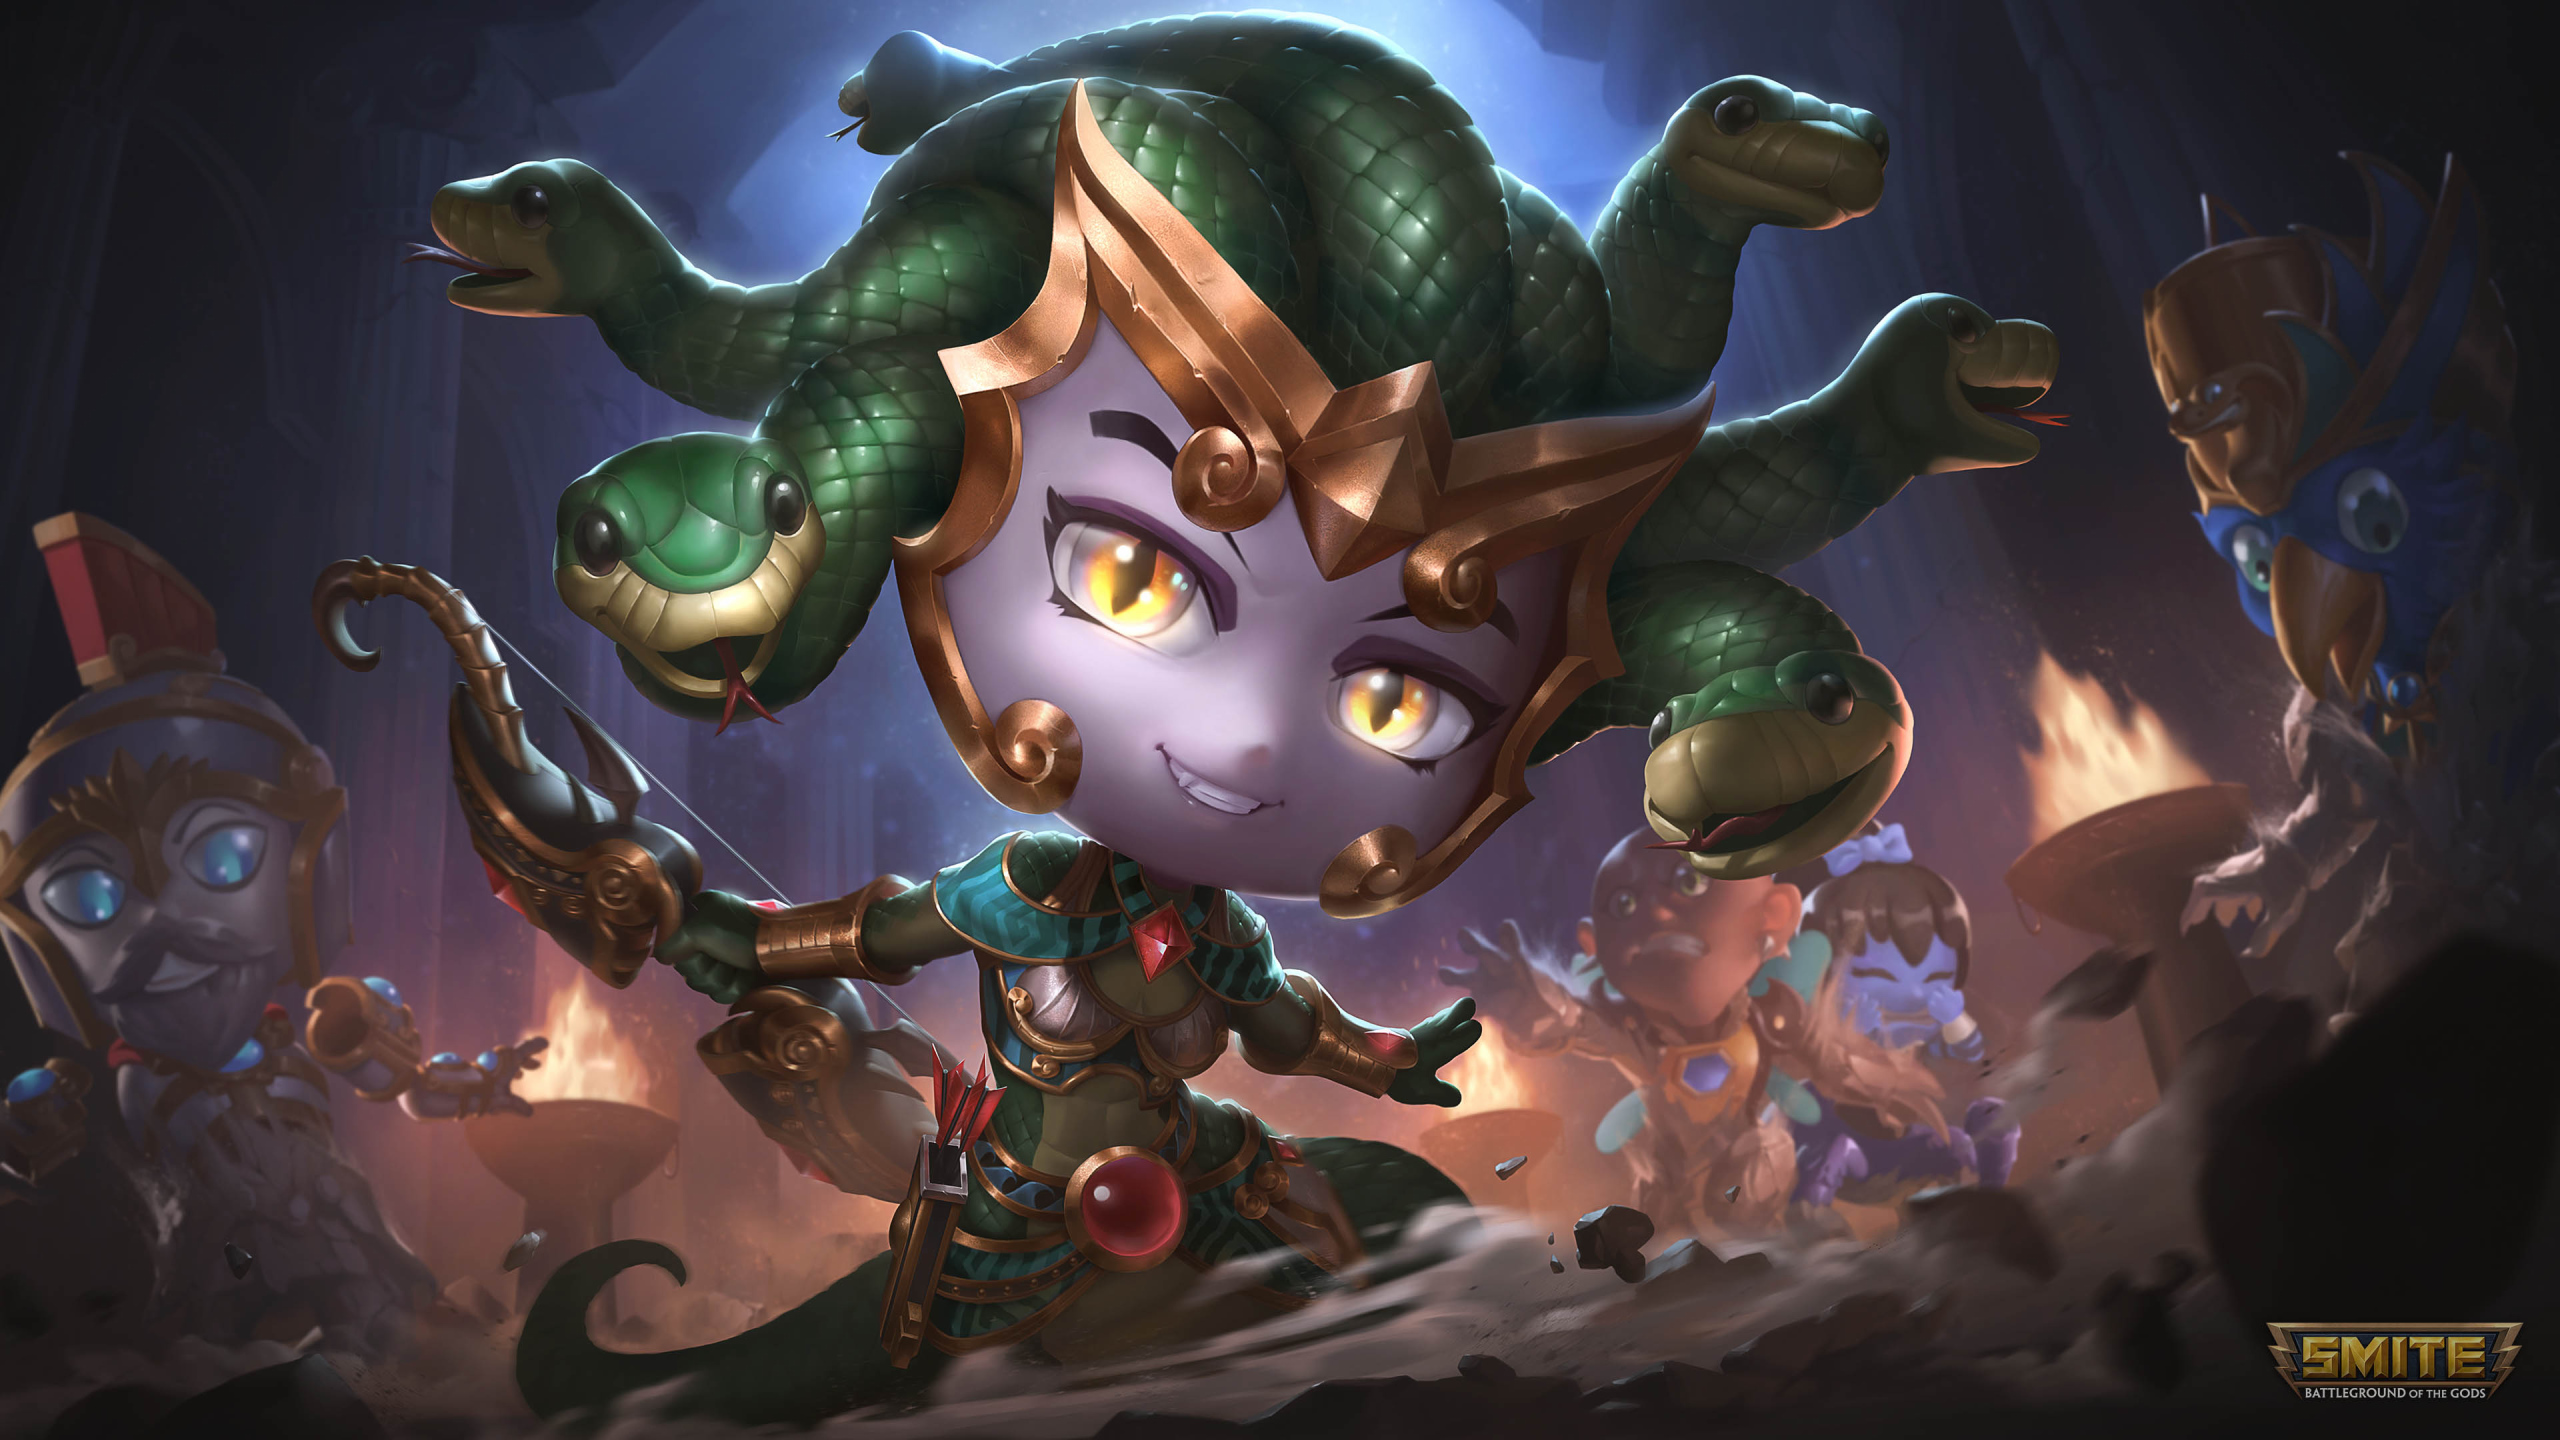 Free desktop wallpaper with Medusa from SMITE in resolution 2560x1440.